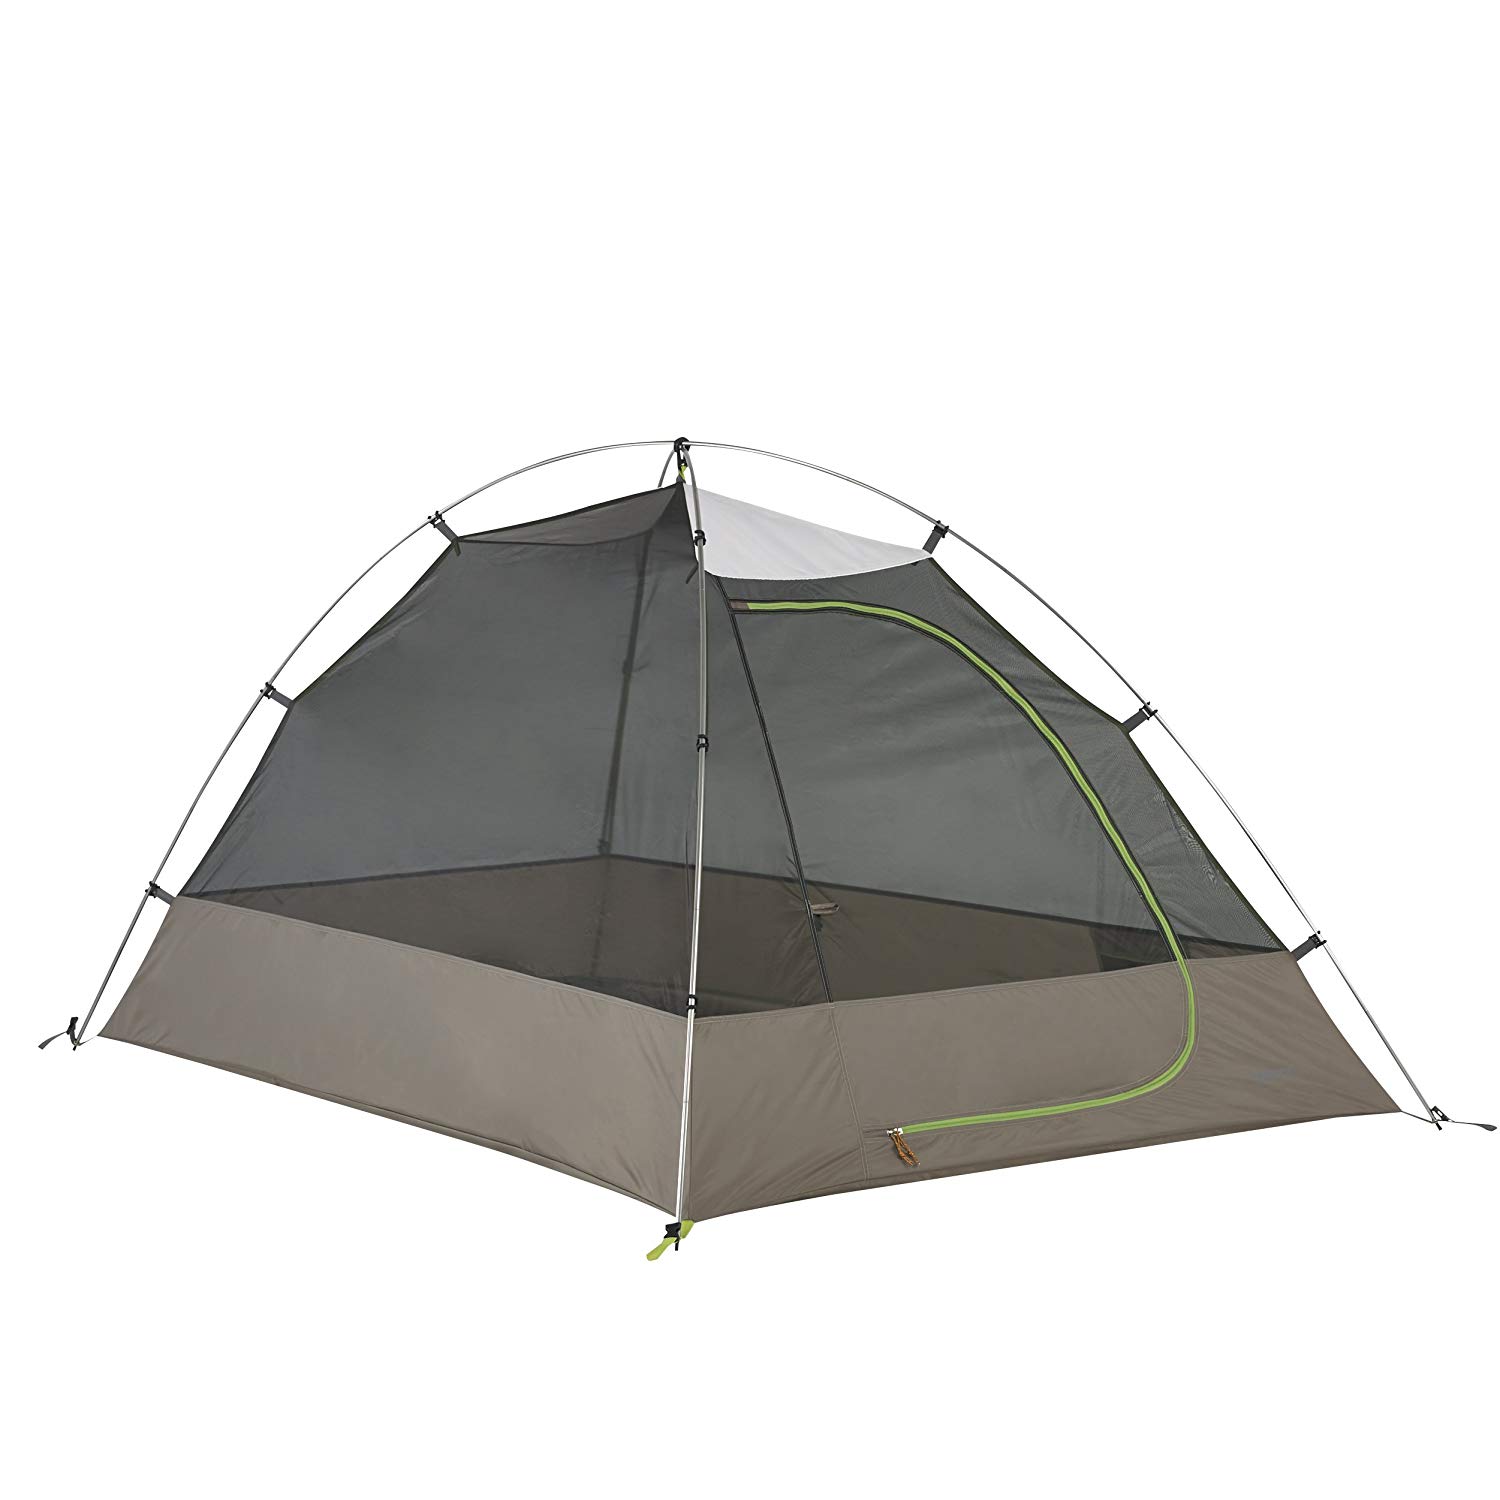 AIOIAI Grand Mesa Tent – 2 to 4 Person Camping and Backpacking Tents